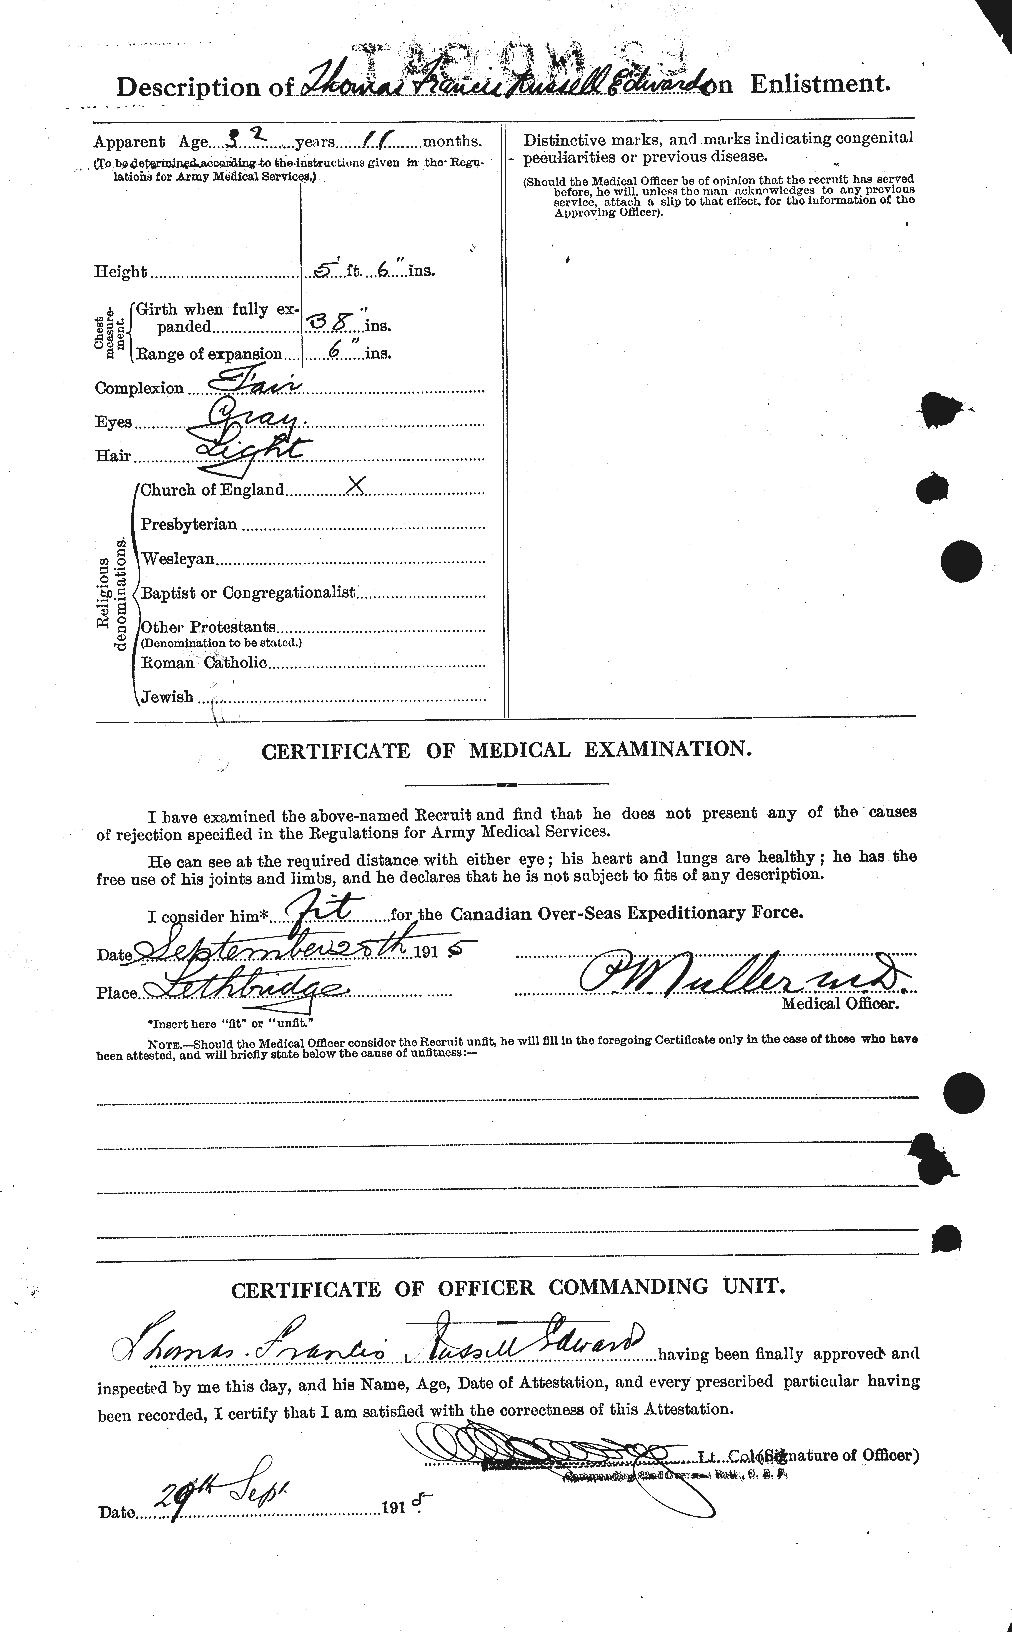 Personnel Records of the First World War - CEF 310357b